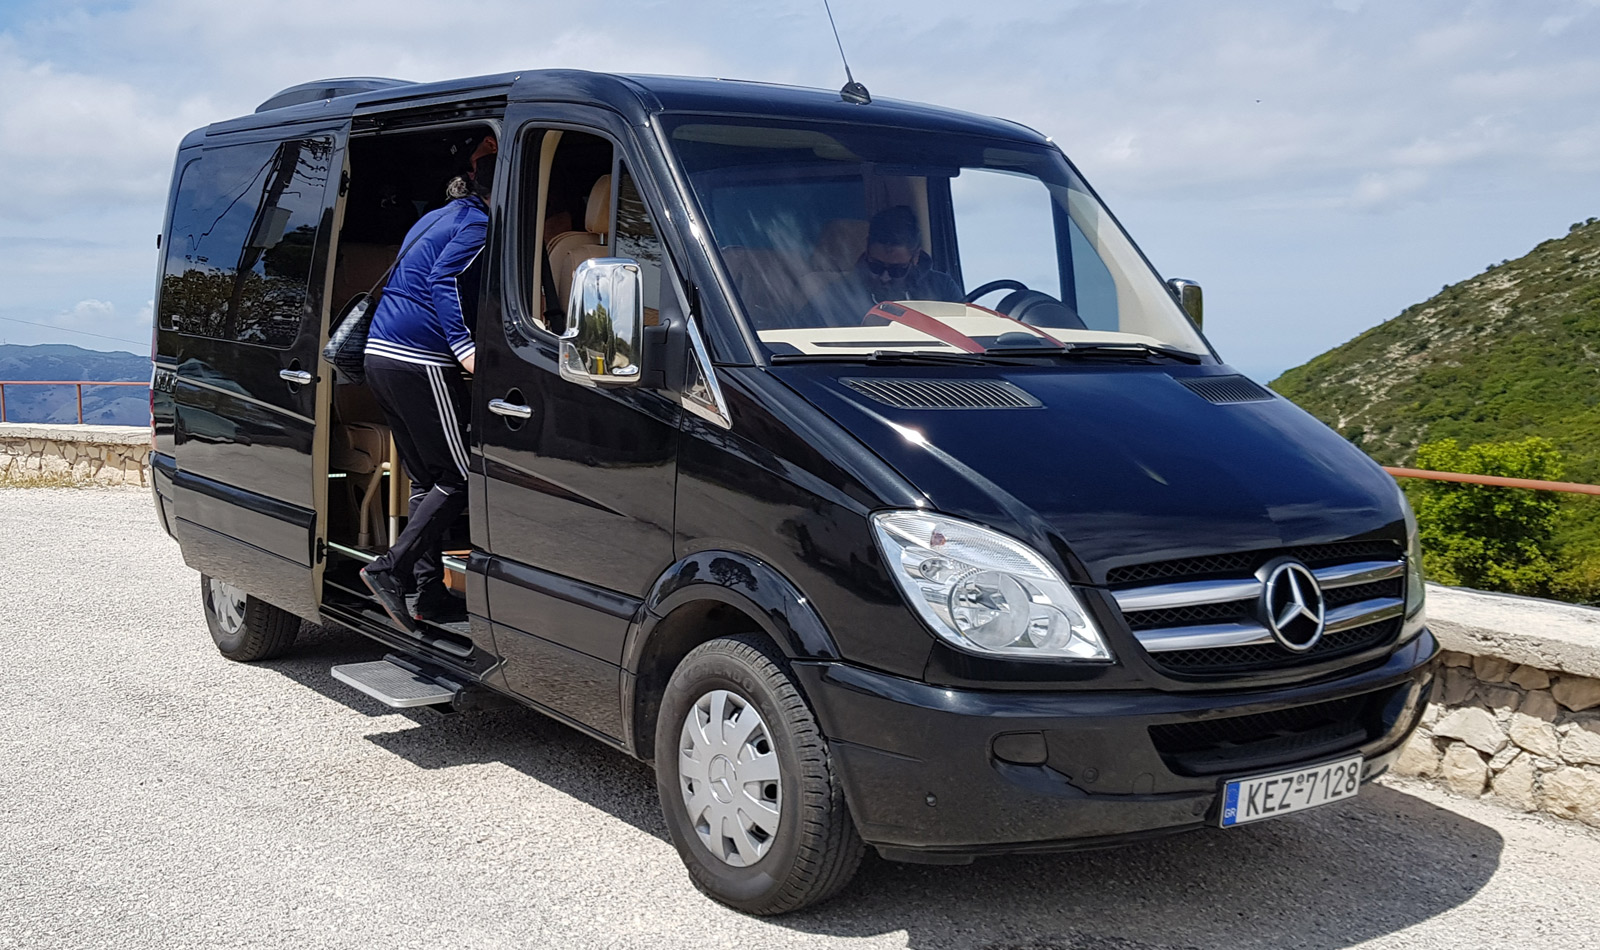 Ithaca Transfers - Ithaca Tours - Ithaca Private Tours - Ithaca Taxi - Ithaca Minibus - Ithaca Private Transfers - Ithaca chauffeur services - Ithaca Island Tour - Taxi Ithaca Greece - Taxi Transfers Ithaca